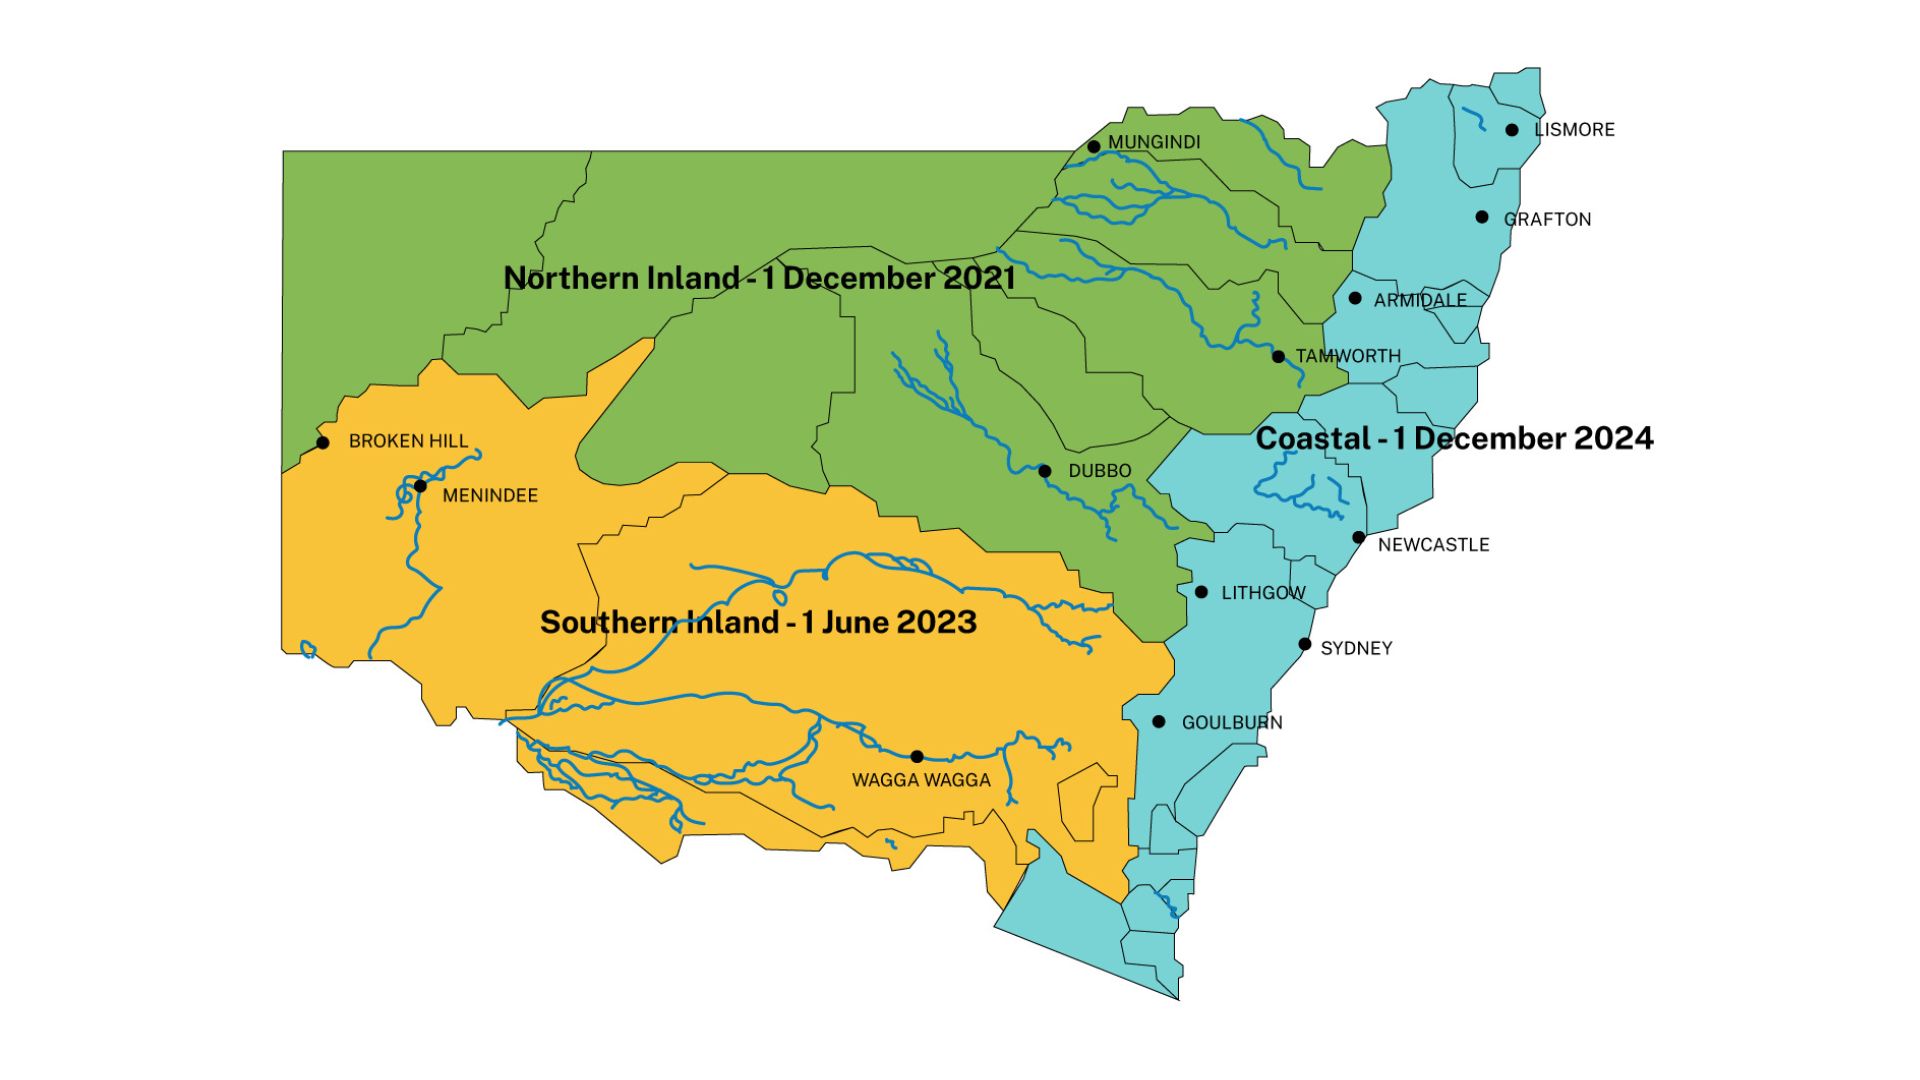 Map of NSW highlighting the three different metering region compliance deadlines for the Northern Inland, Southern Inland and Coastal.